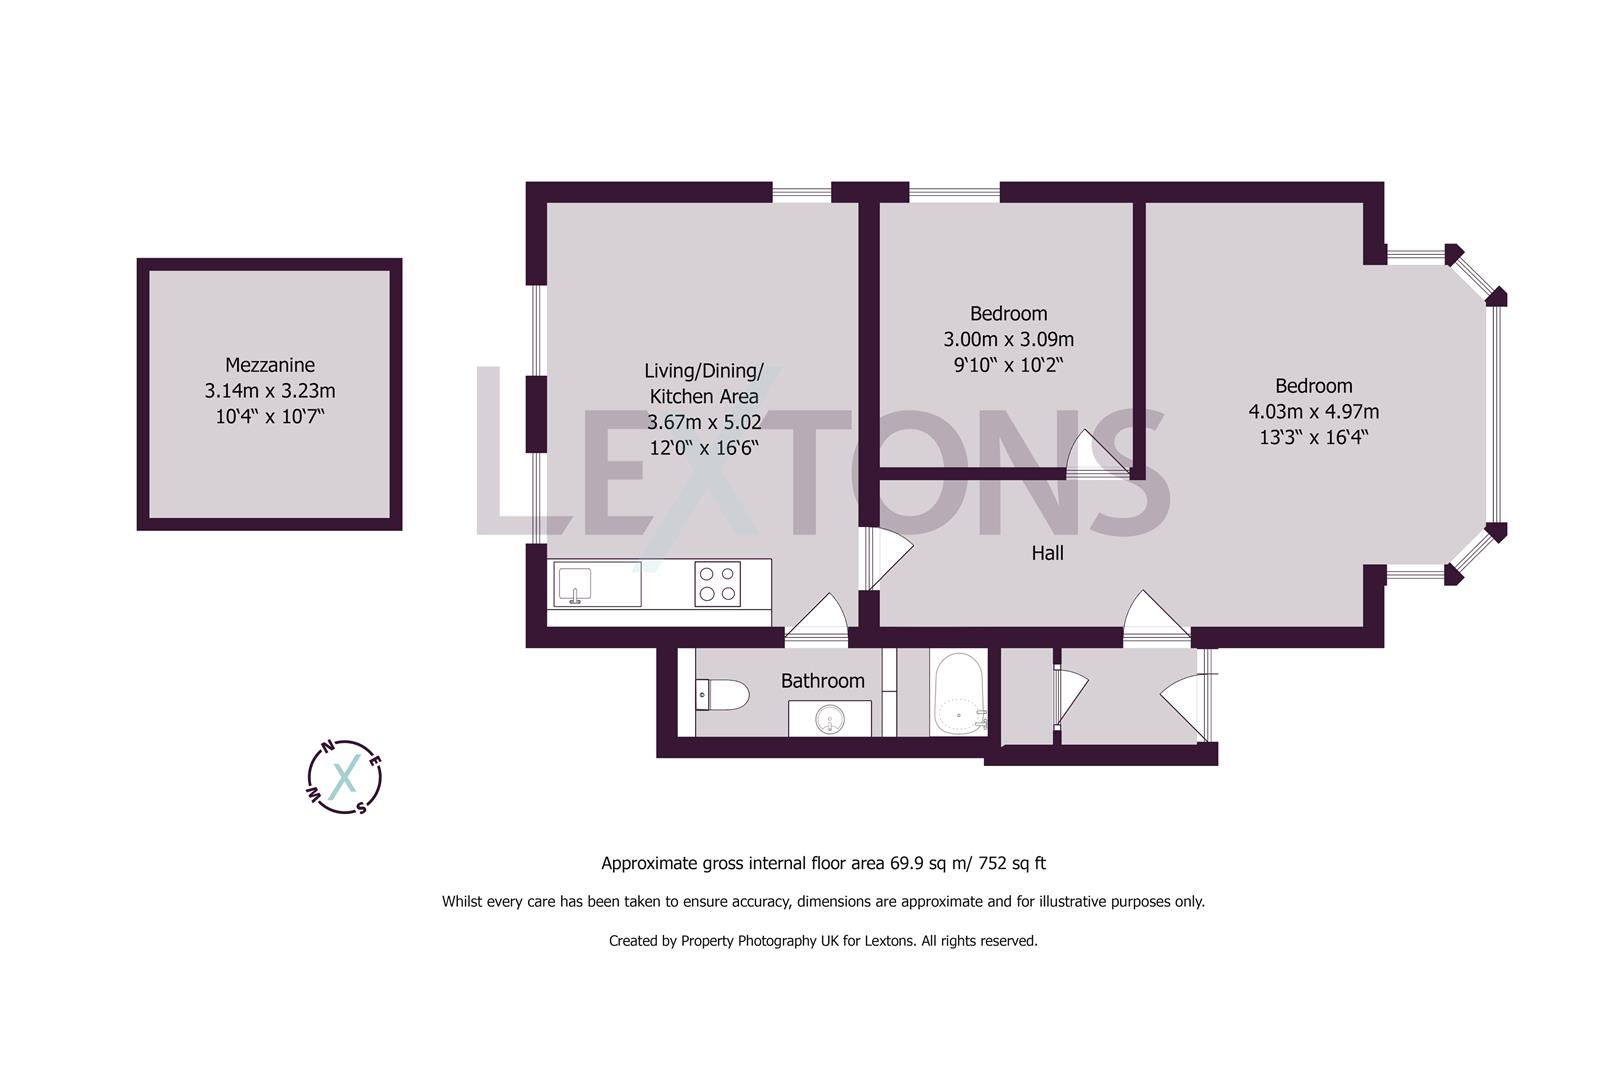 Floorplans For St. Aubyns, Hove